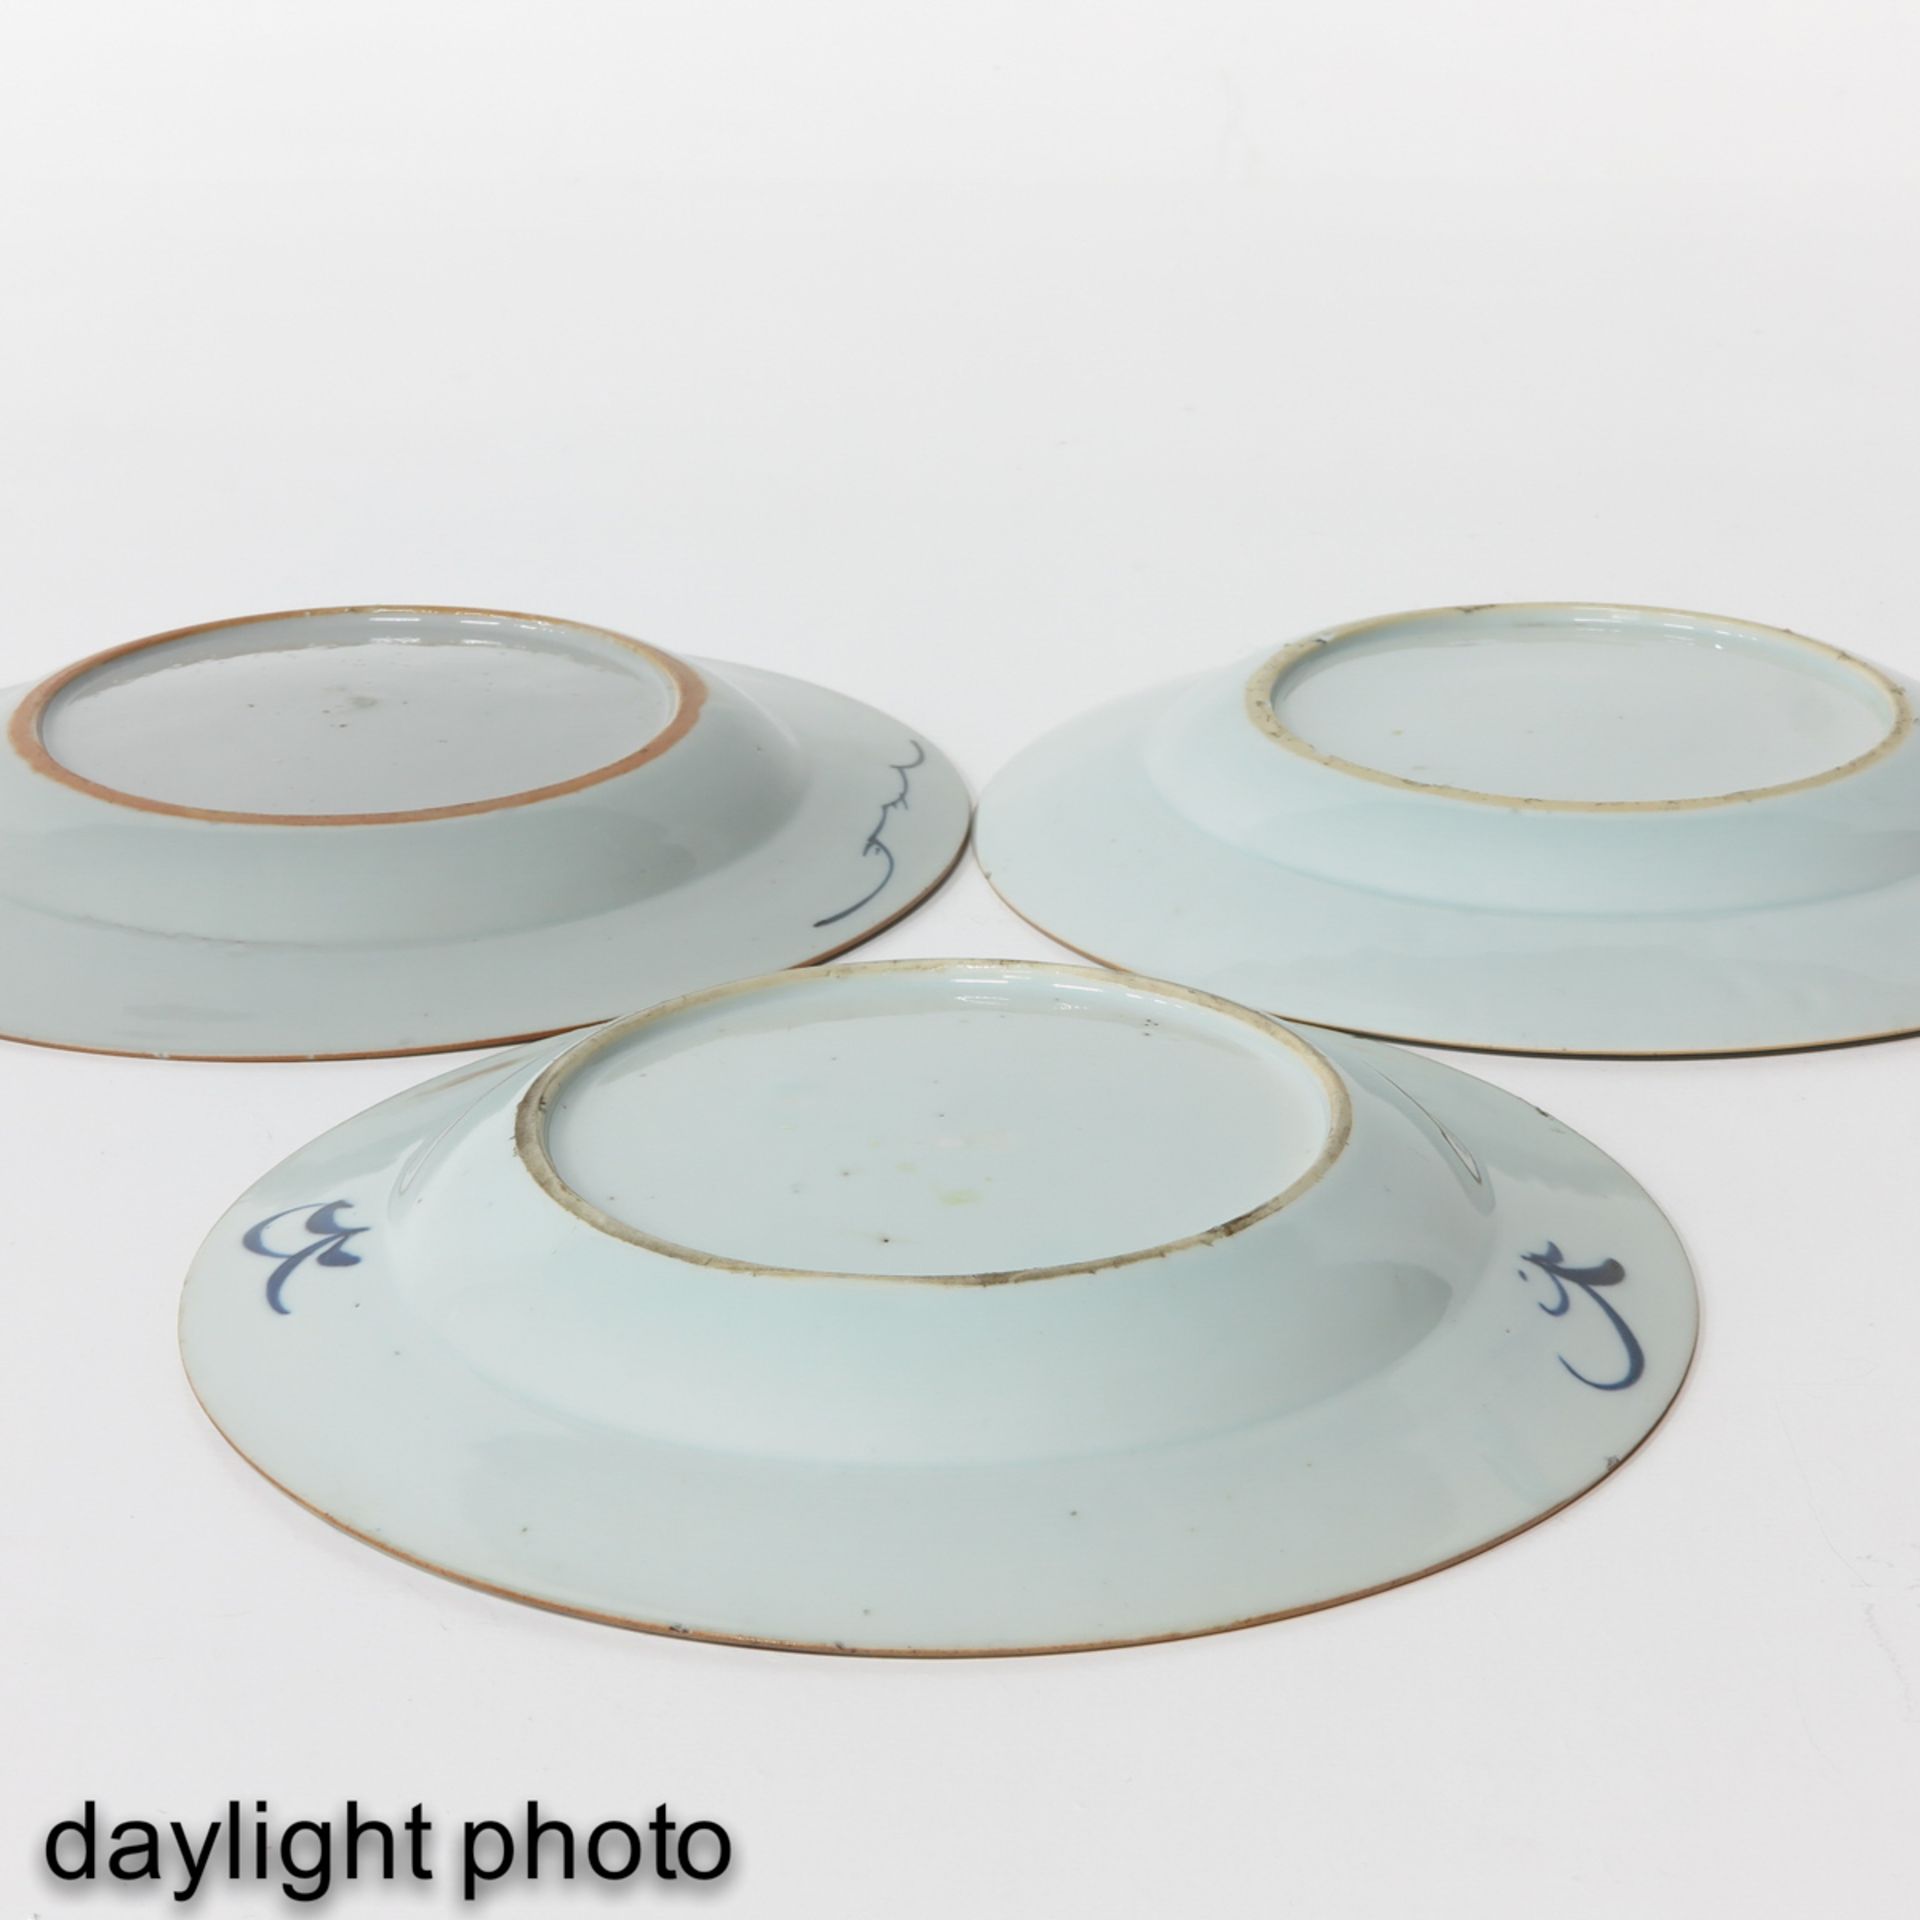 A Collection of 6 Plates - Image 8 of 10